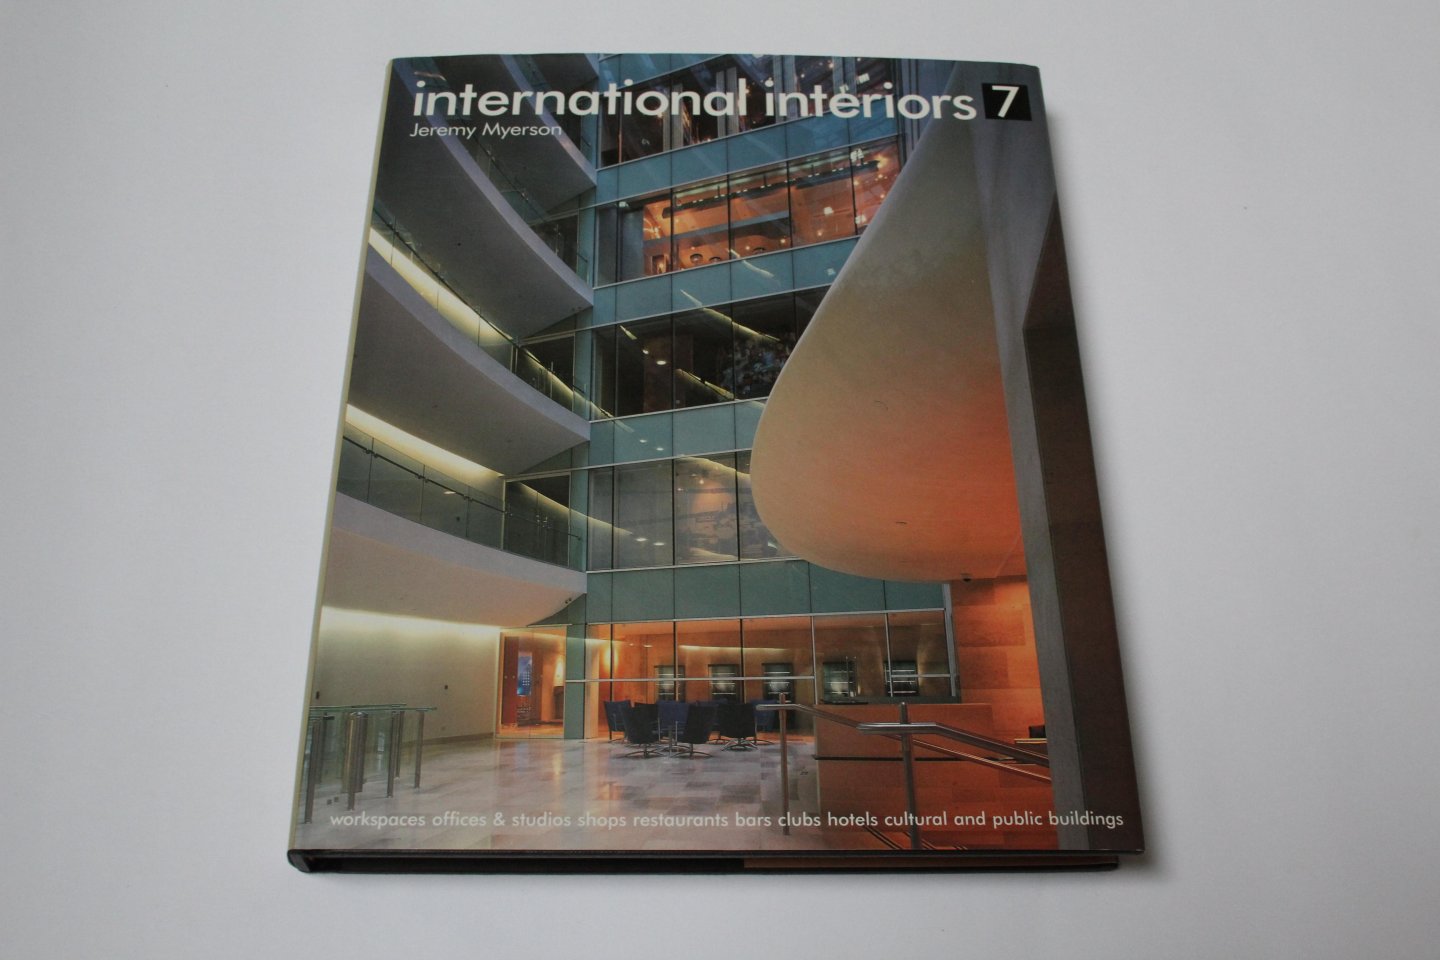 Jeremy Myerson - International interiors 7. Workspaces, Offices & Studios, Shops, Restaurants, Bars, Clubs, Hotels, Cultural and Public Buildings